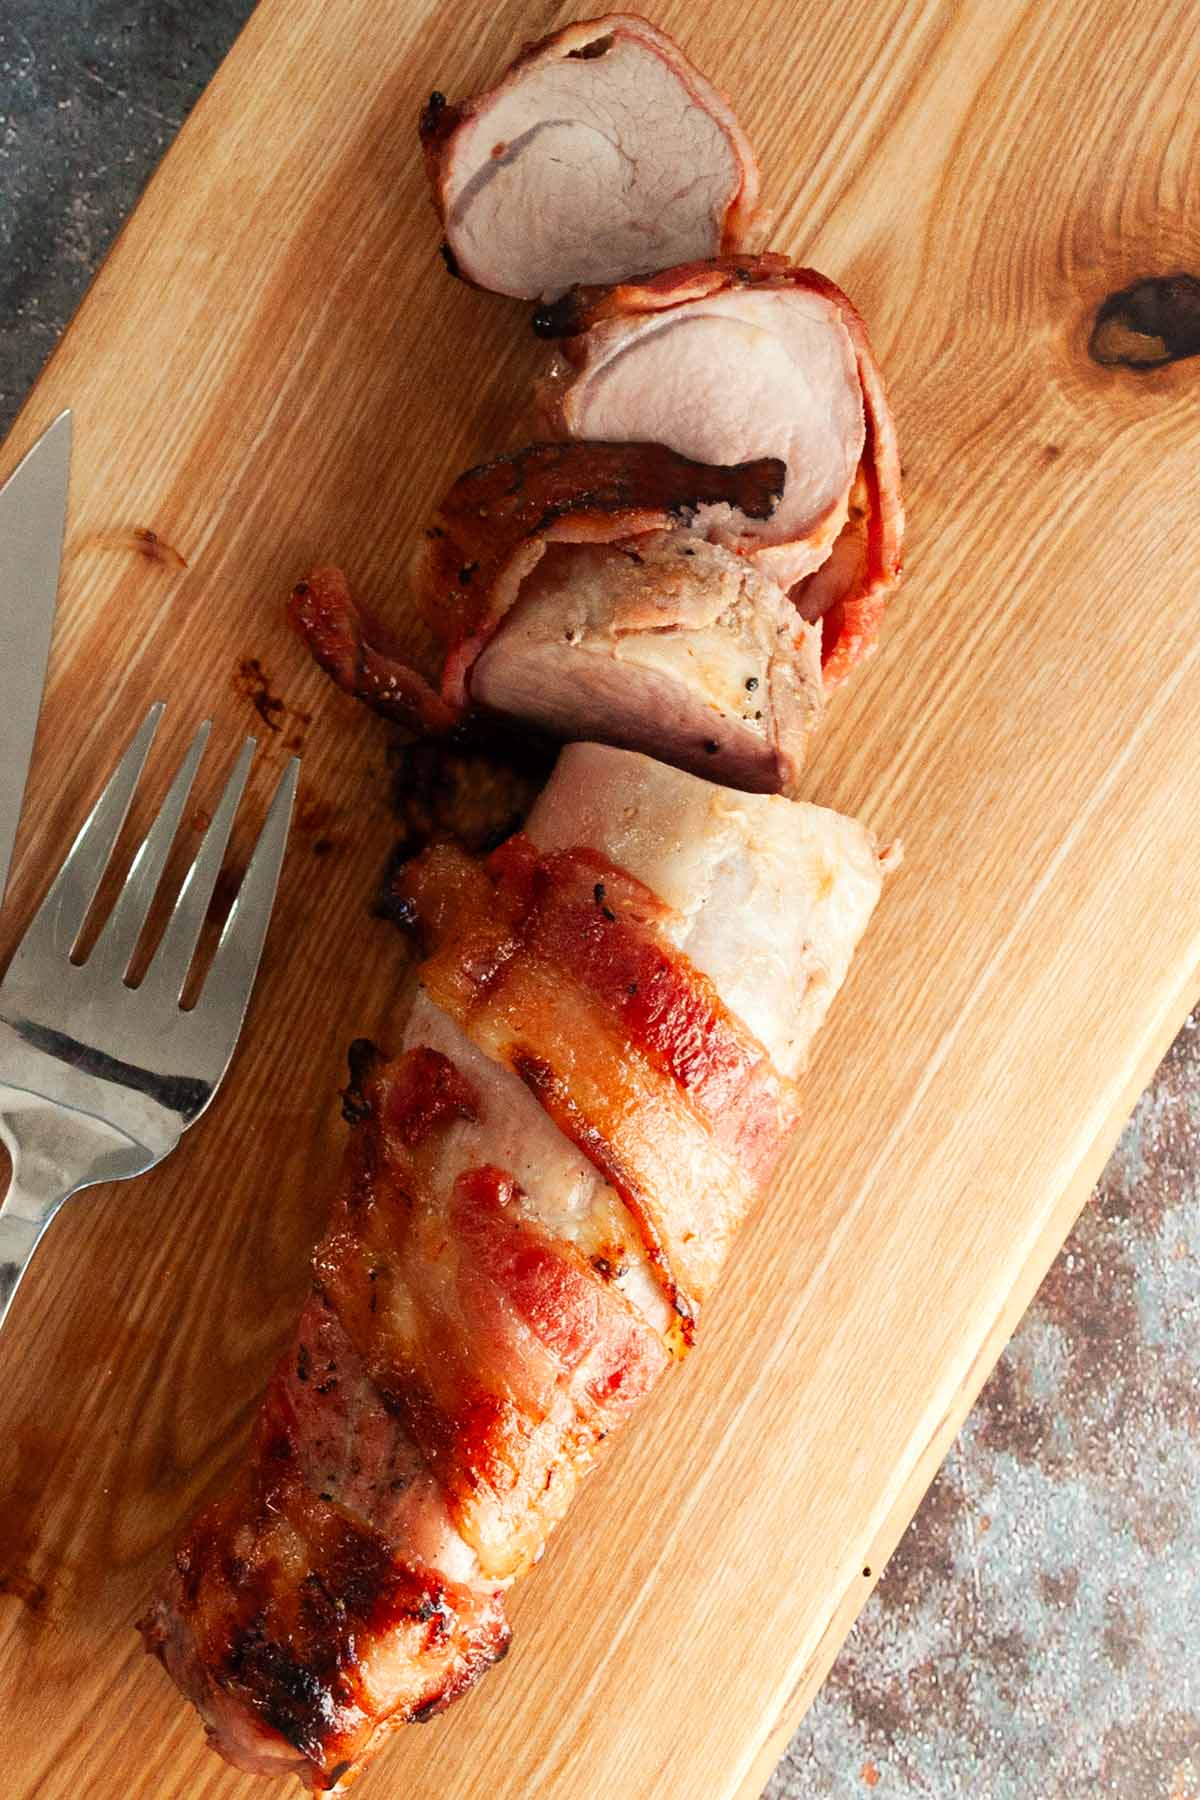 A partially sliced grilled bacon-wrapped pork tenderloin on a wooden cutting board.